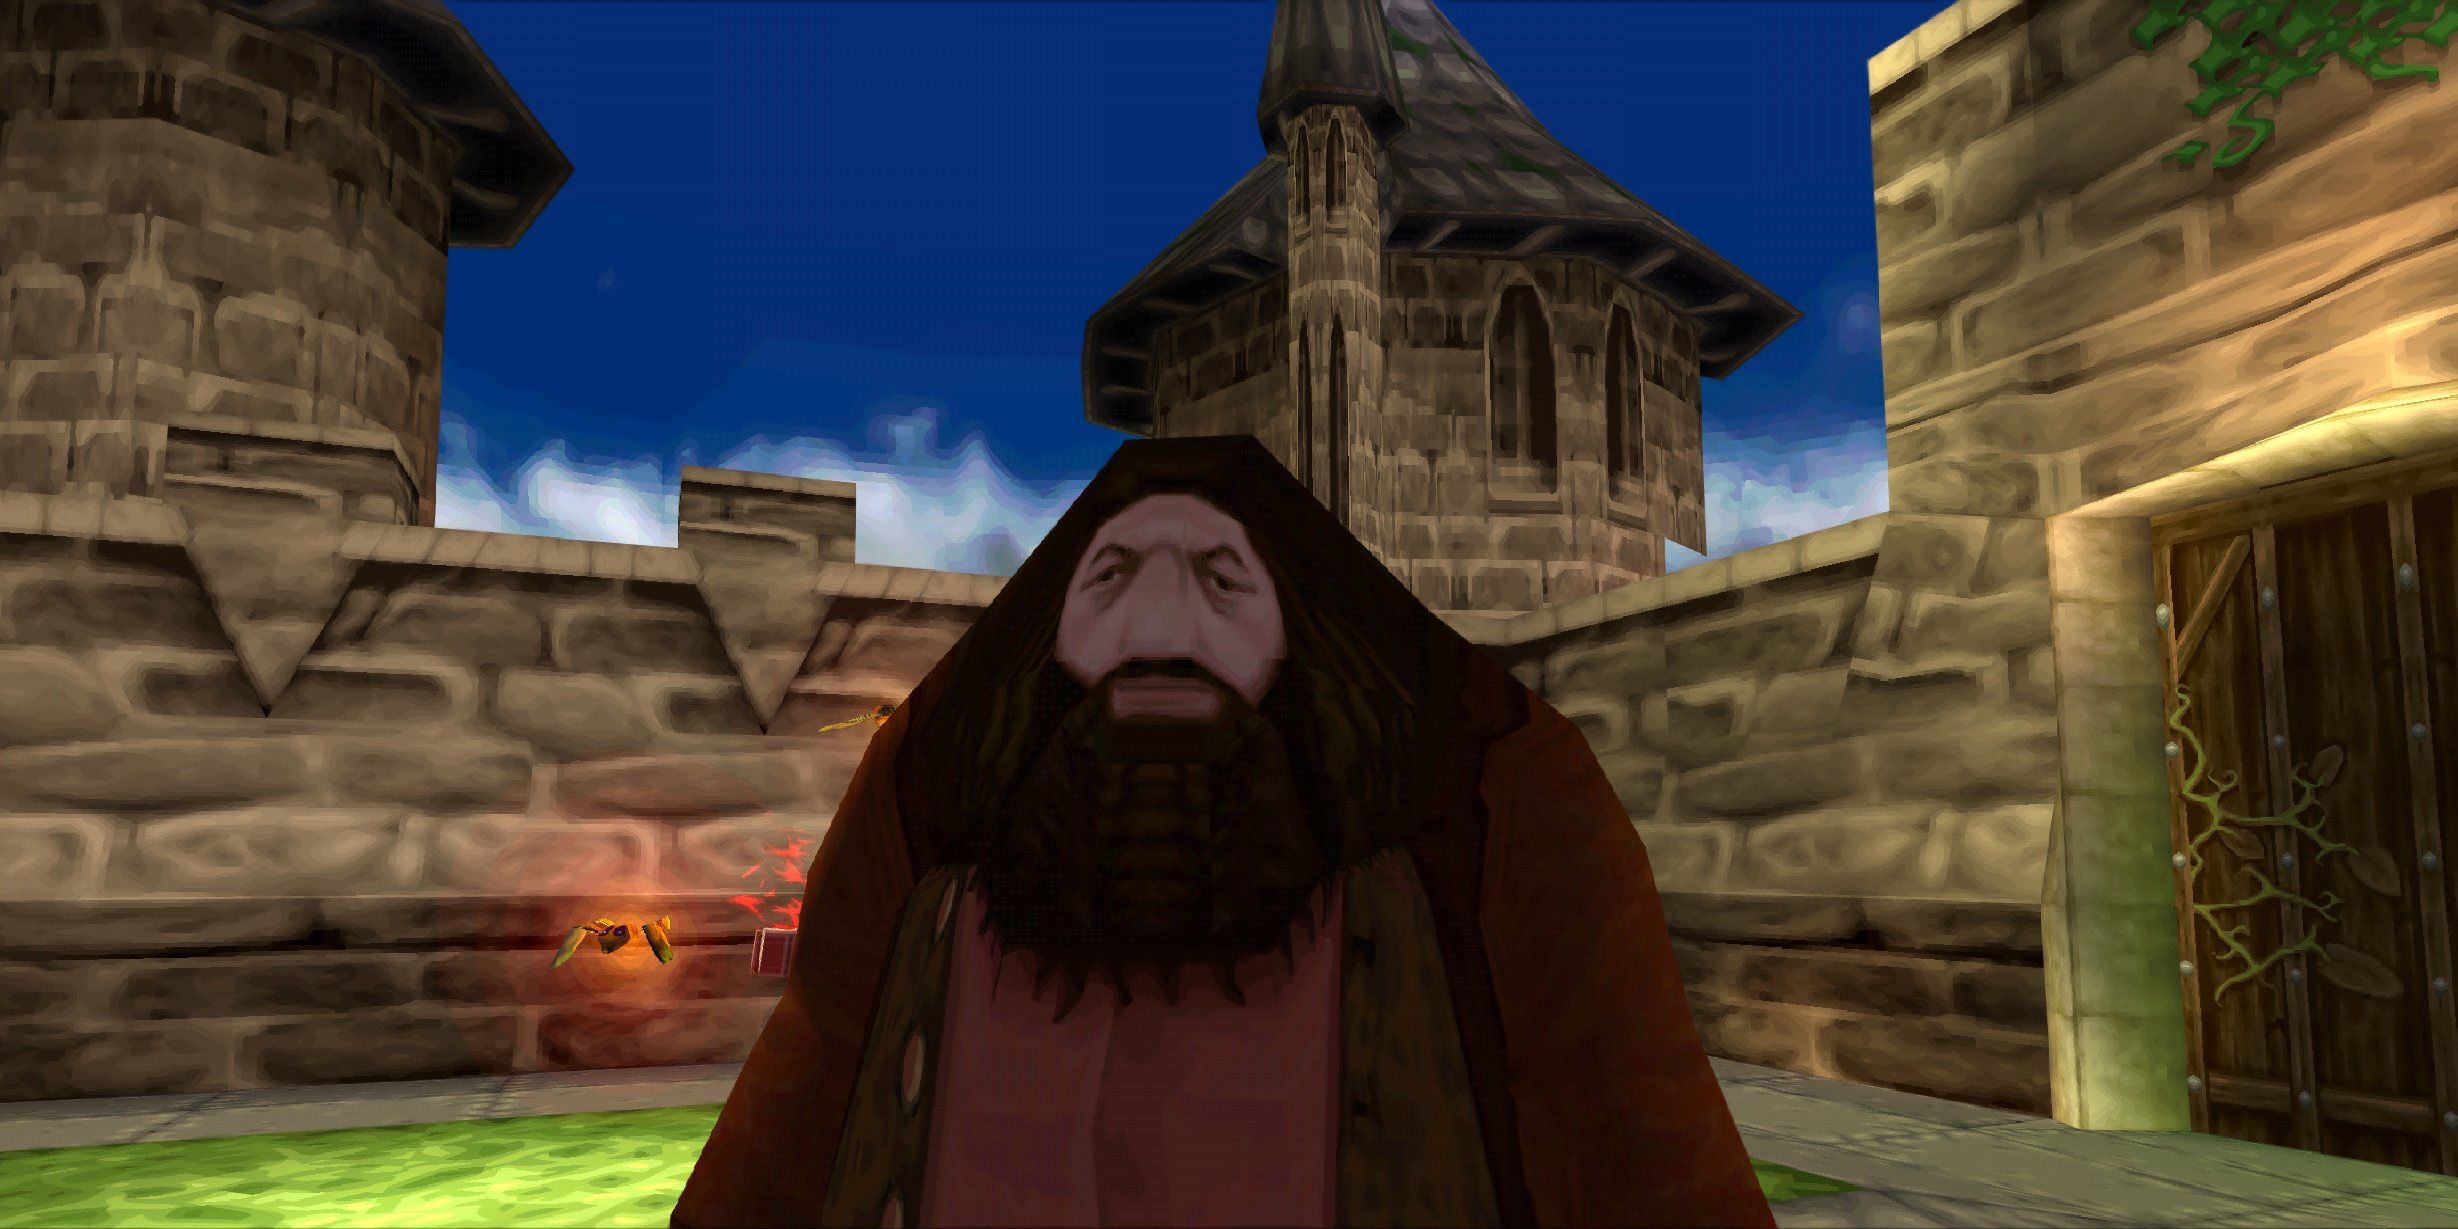 Video Compares Old Harry Potter Game to Hogwarts